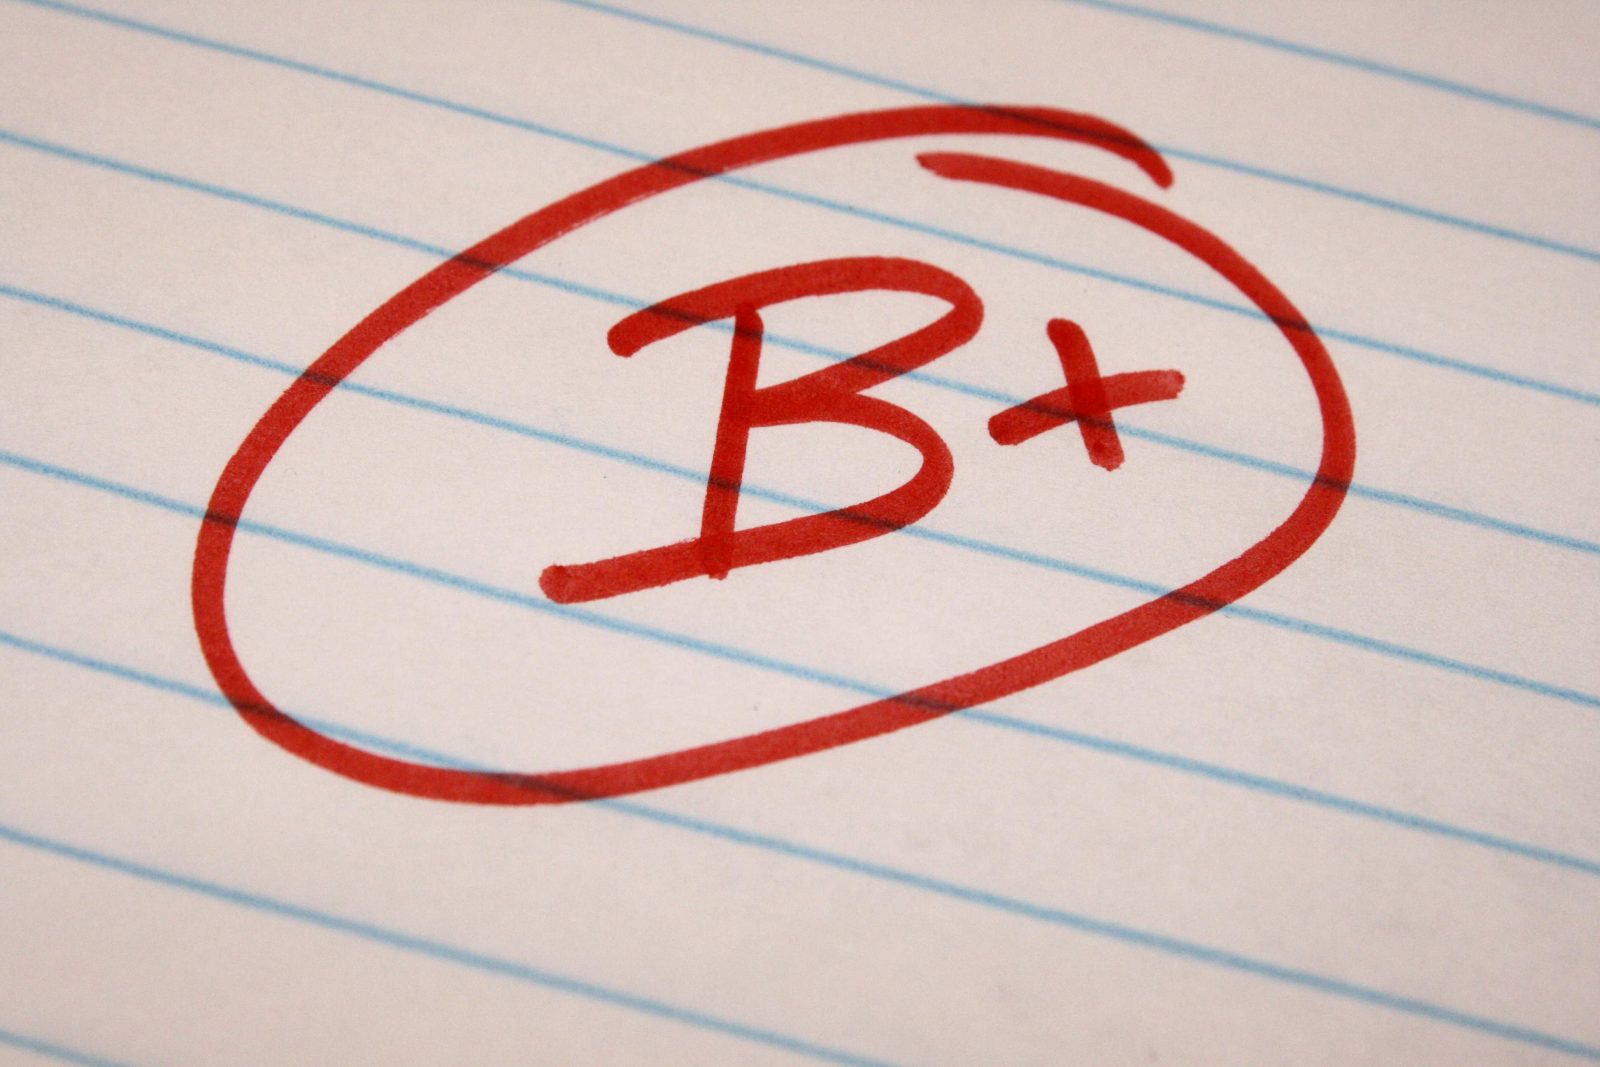 You got: B+! What Grade Are You Getting in Life So Far?